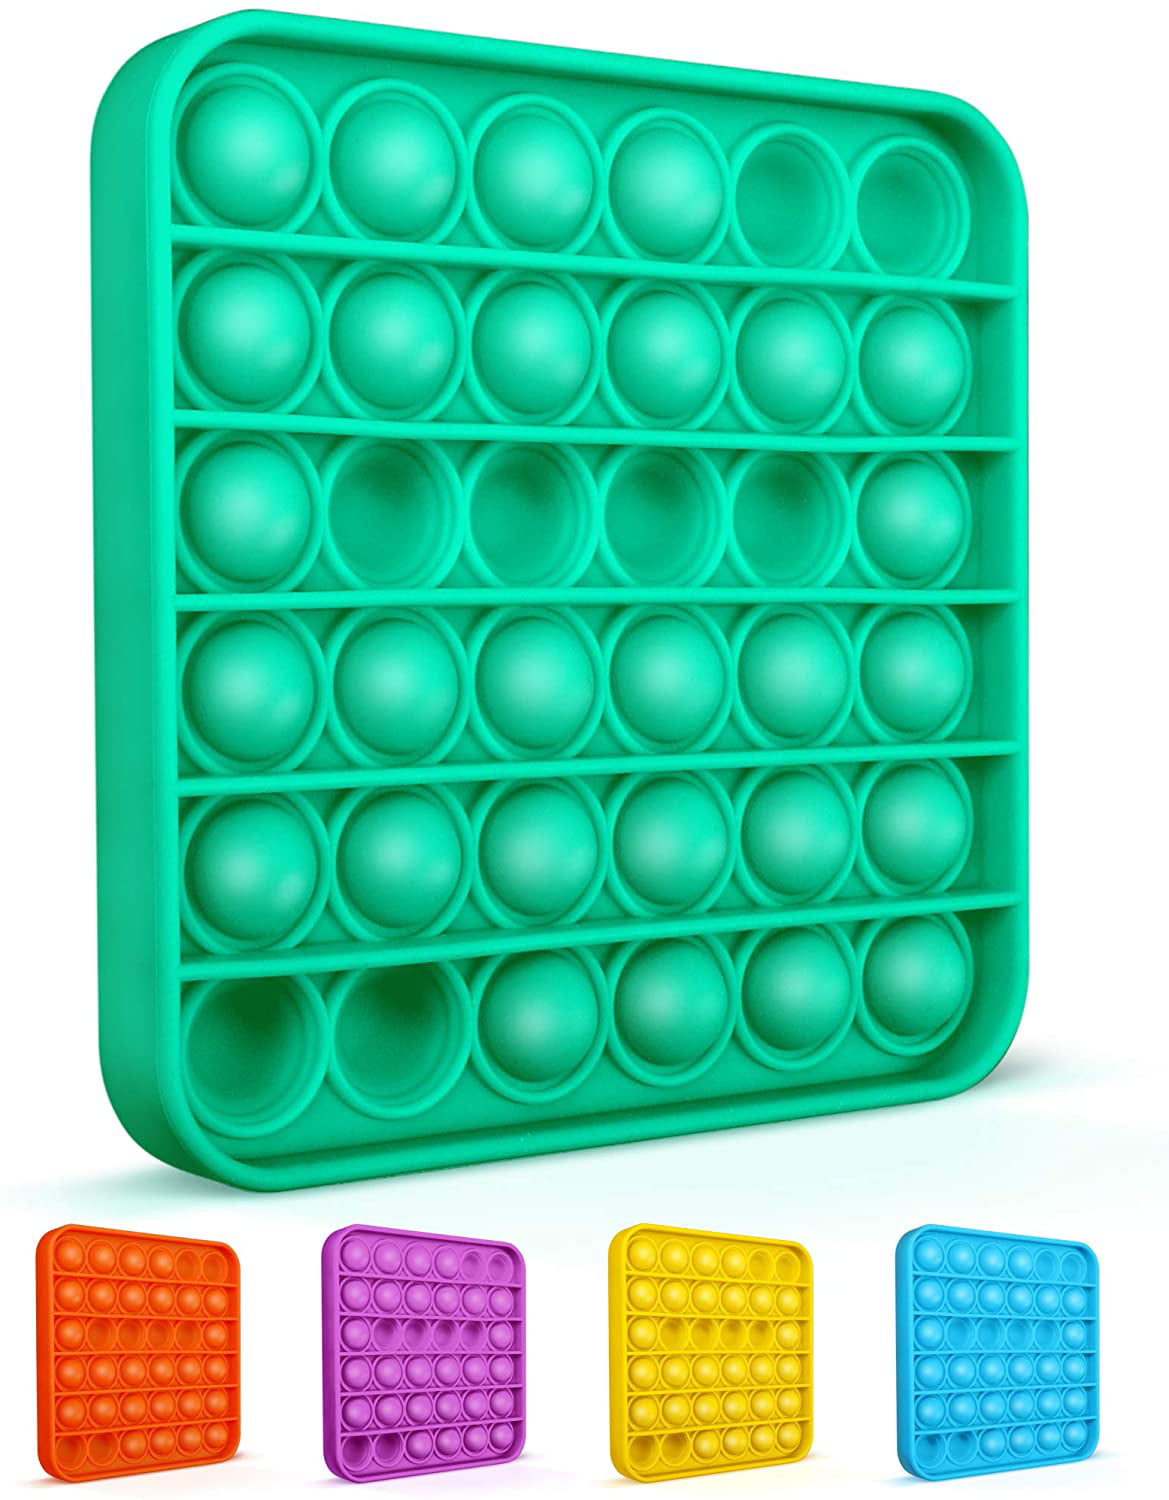 Green Square Silicone Stress Relief Toy for Kids and Adults Push Pop Bubble Fidget Toys,Pop It Fidget Sensory Toy 